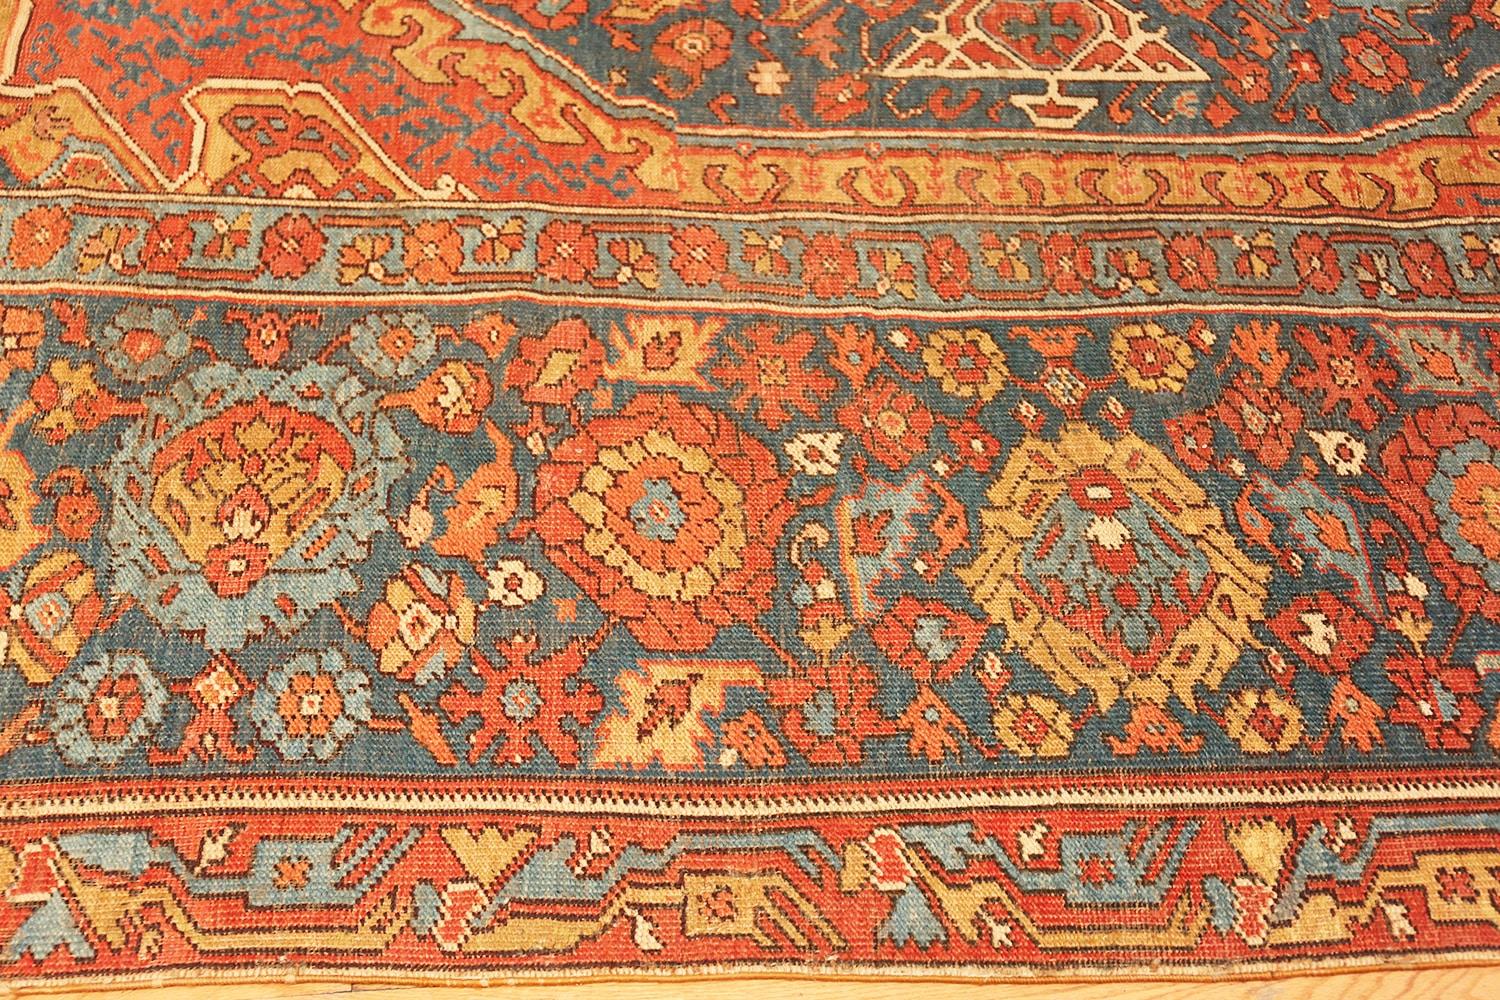 A magnificent and rare oversized antique 17th century Turkish Smyrna rug, country of origin/rug type: antique Turkish rugs, Size: 11 ft 8 in x 21 ft 3 in (3.56 m x 6.48 m), date: circa late 17th century.

